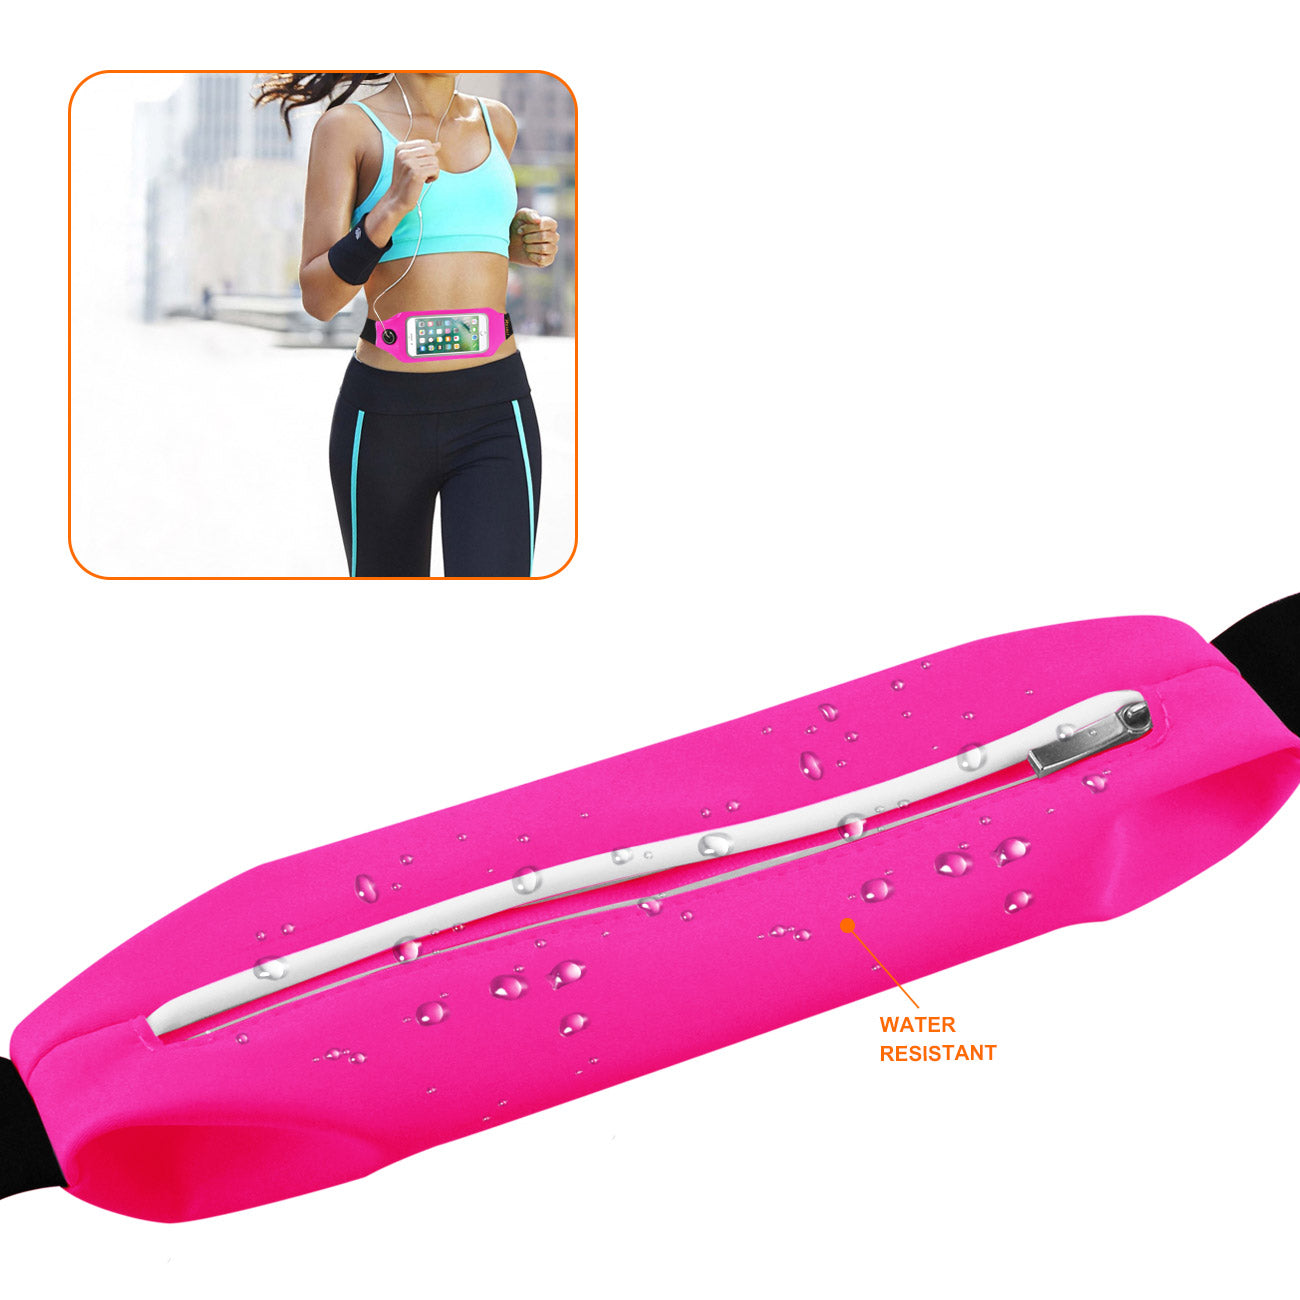 Reiko Running Sport Belt With Touch Screen 5X3X0.5 Inches Device With Two Pockets and LED In Pink